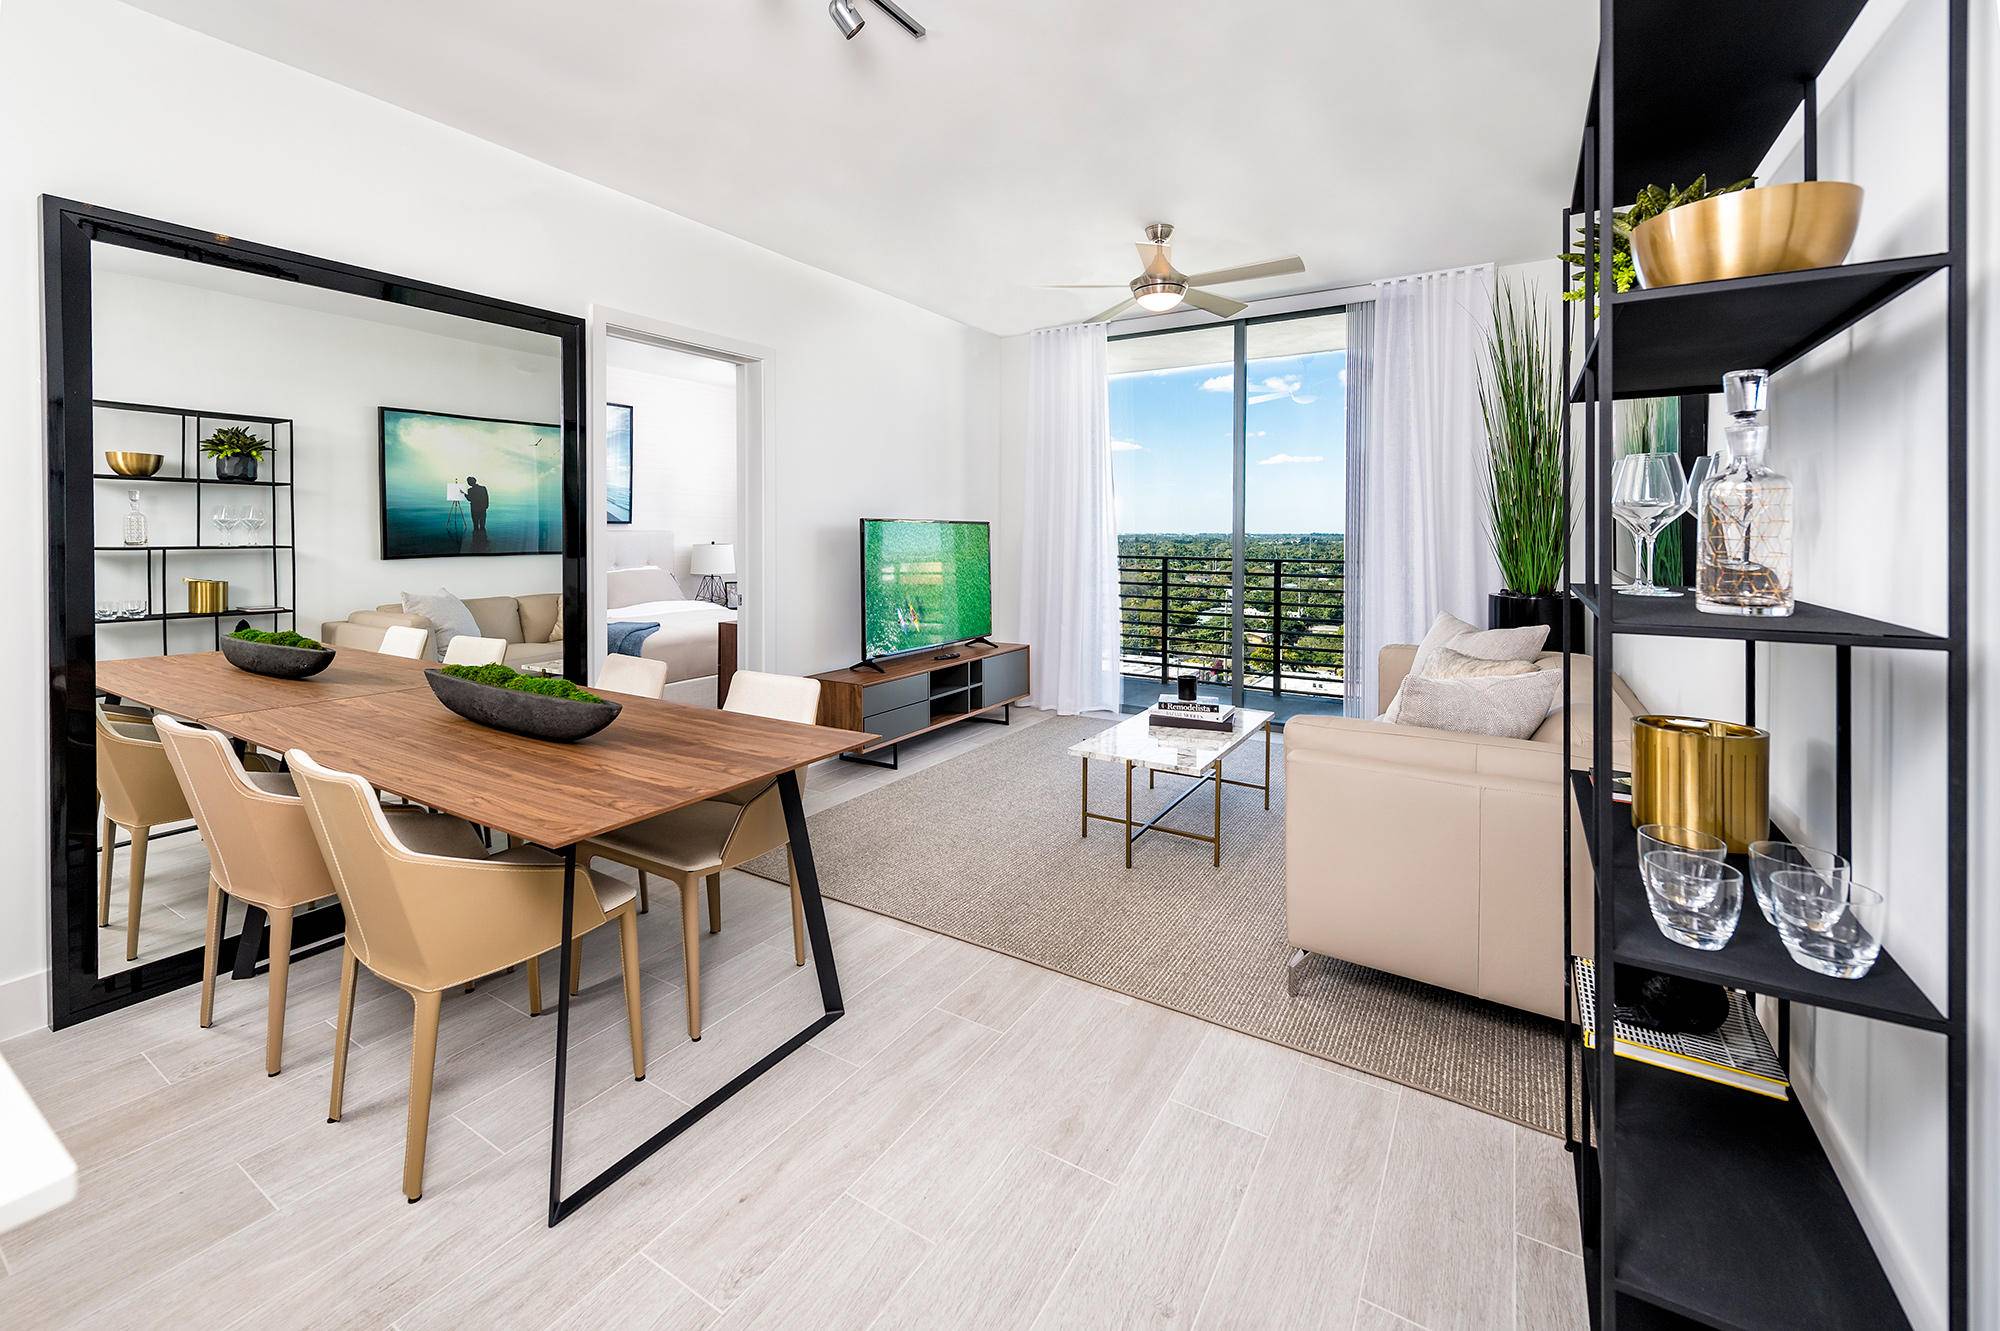 Welcome to Fort Lauderdale's true modern live work play community offering everything under one roof.